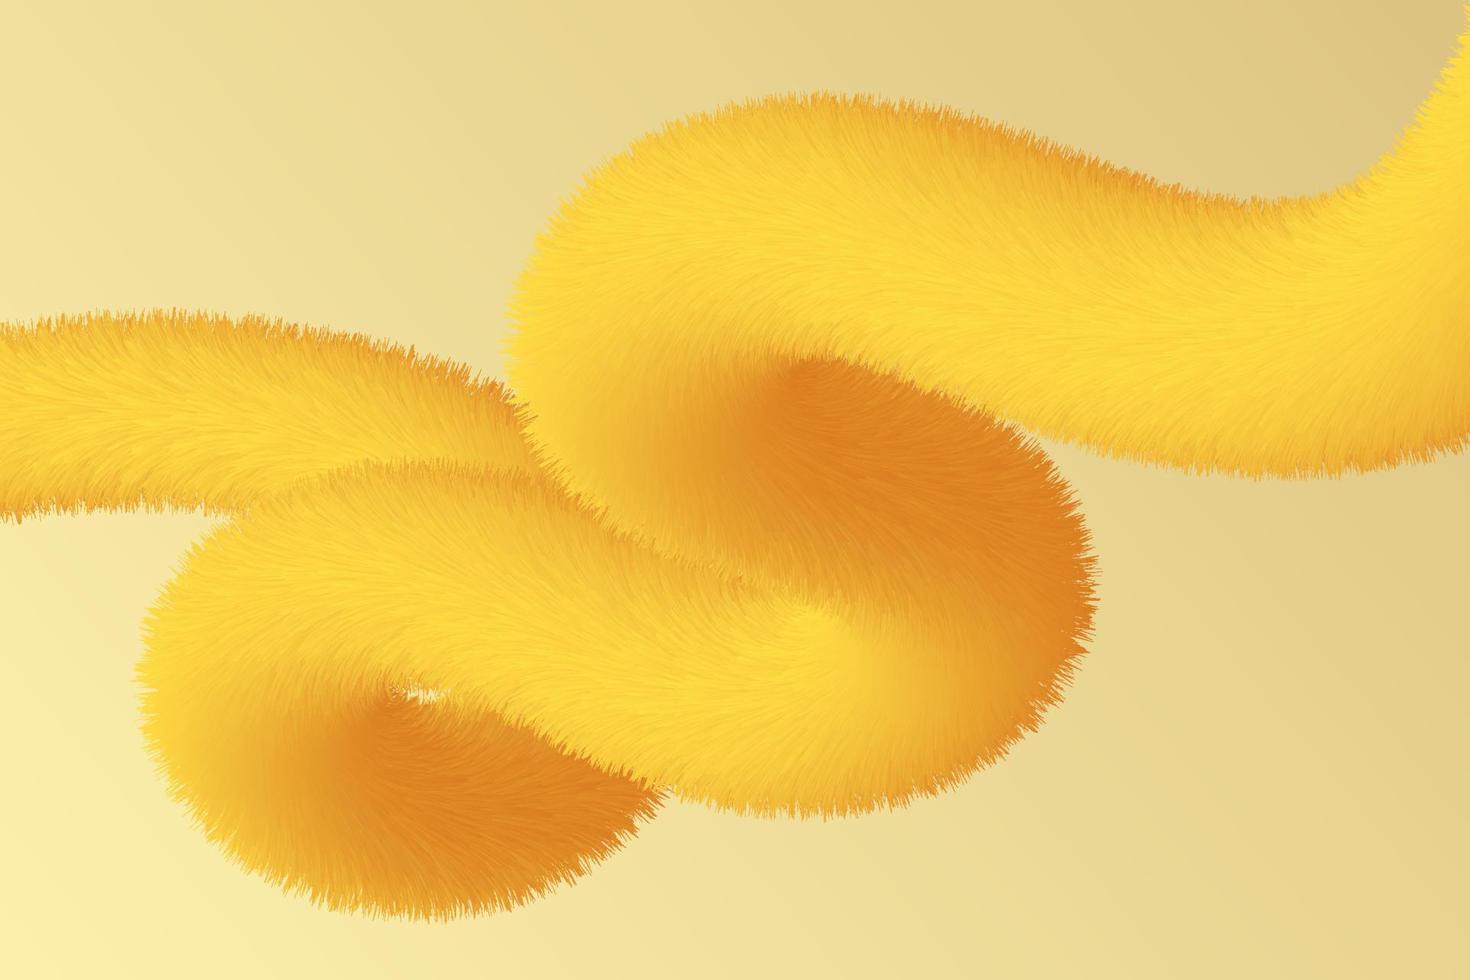 Abstract Yellow Hairy Twisted Shape Background vector